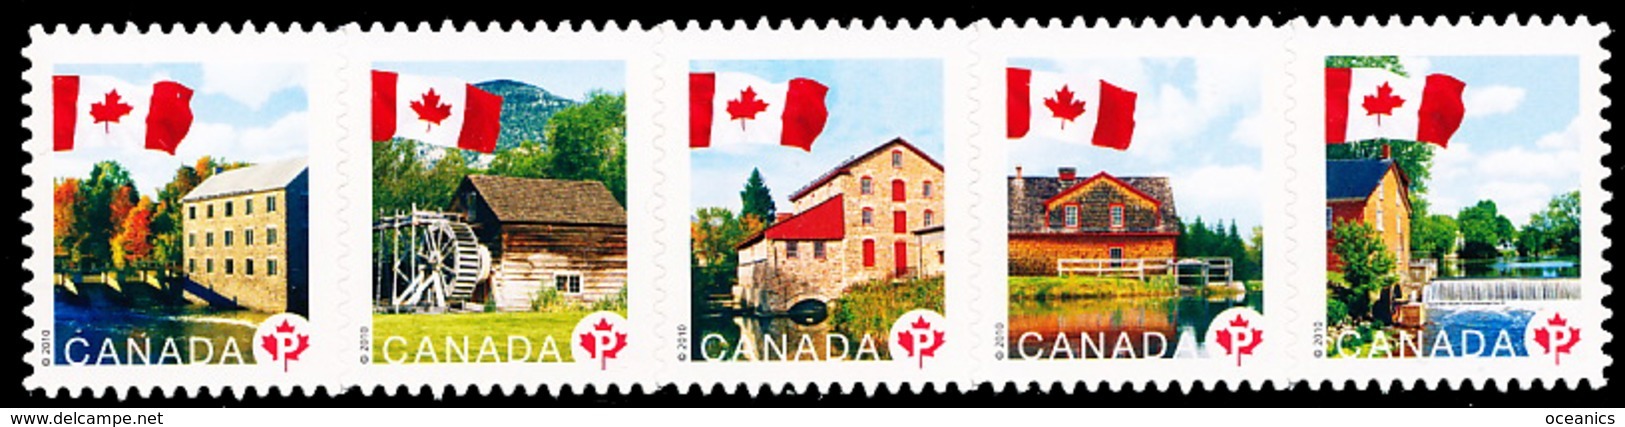 Canada (Scott No.2355a - Timbres Permanants / Permanant Stamps) (**) (P) Bande / Strip - Neufs